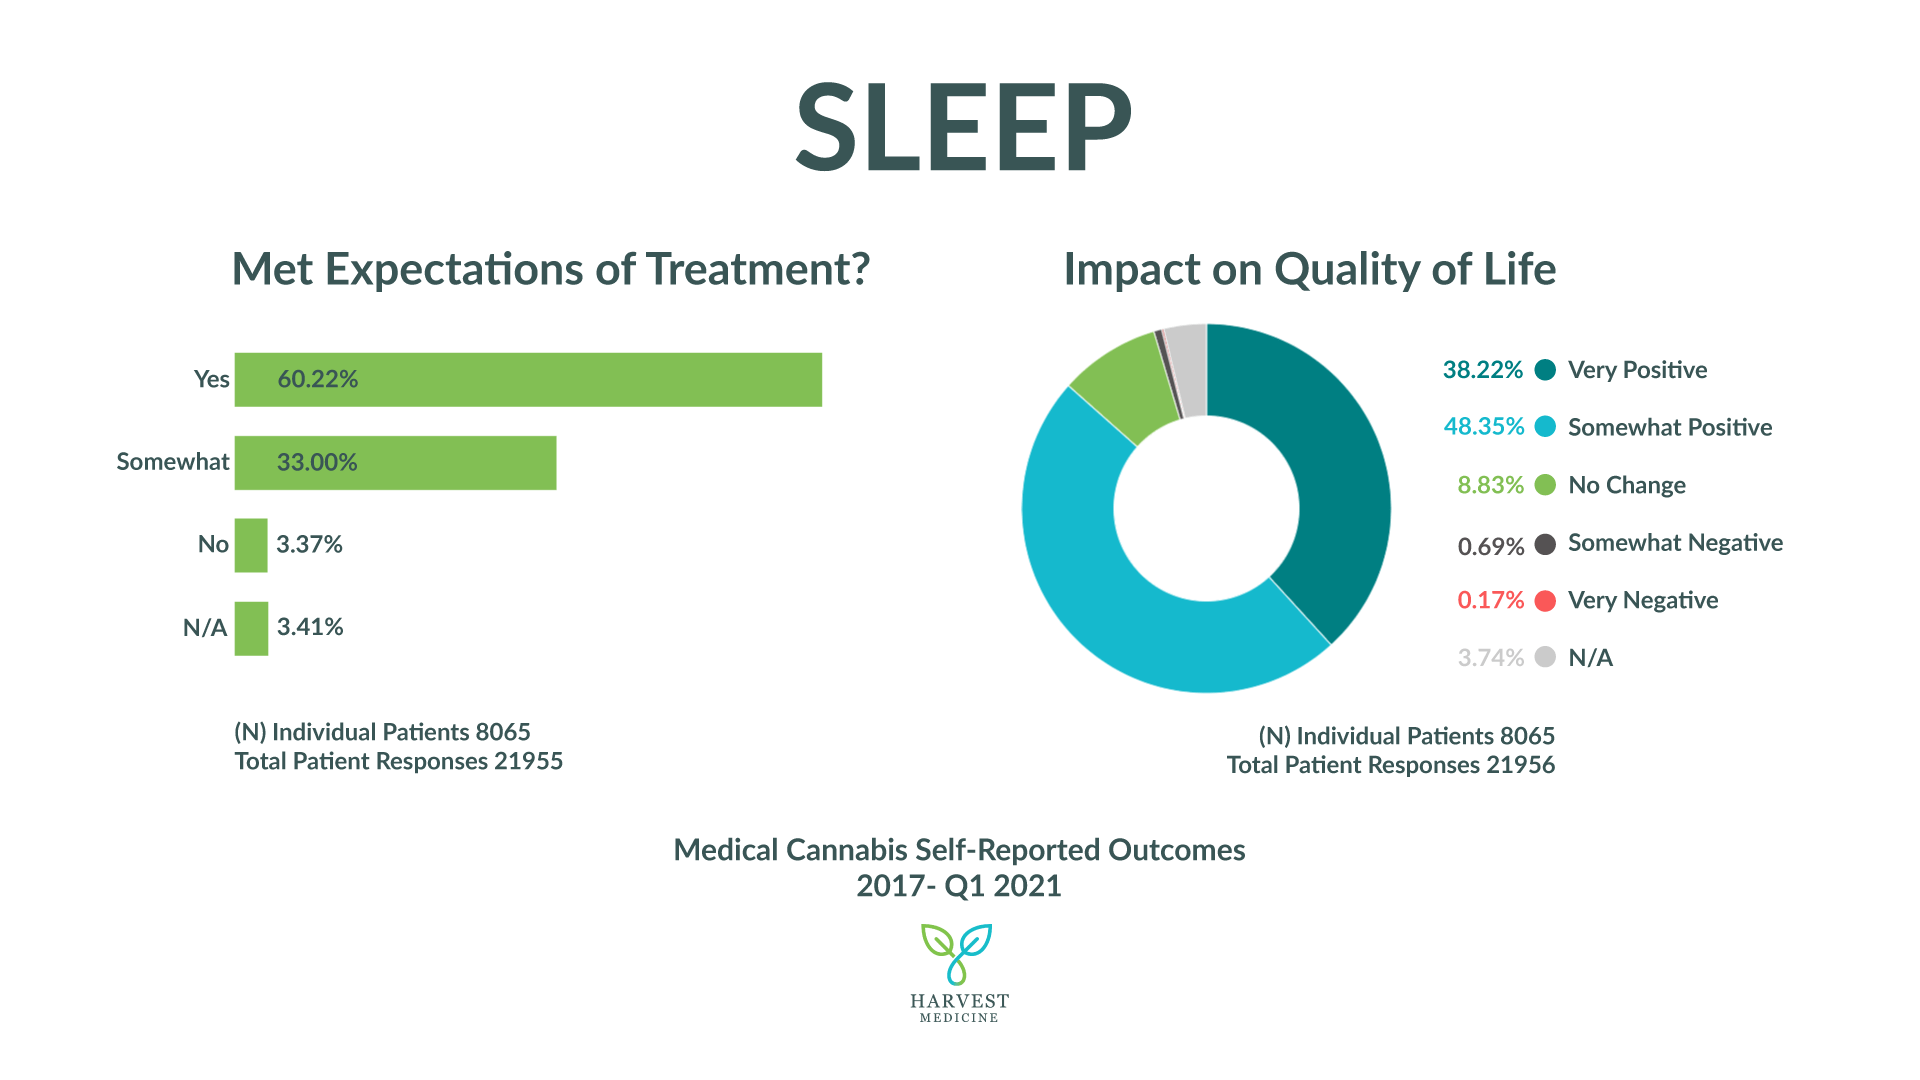 Harvest Medicine's patient self-reported outcomes for sleep from 2017-2021. Sample size 8065